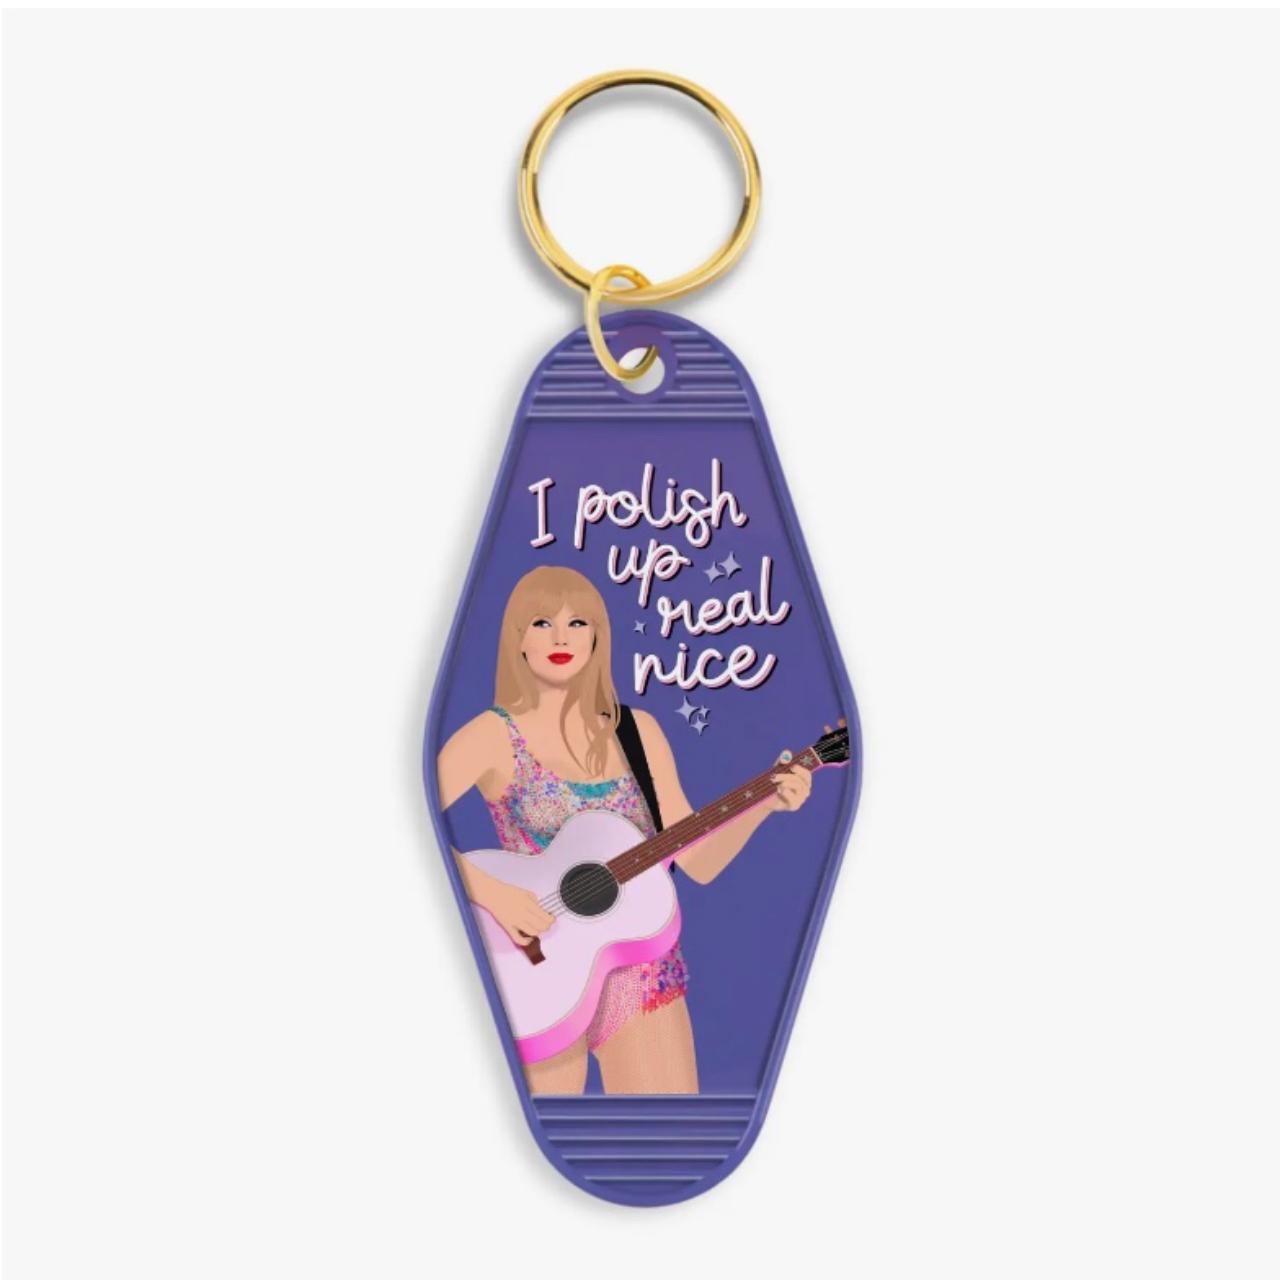 official taylor swift keychain. from the taylor - Depop